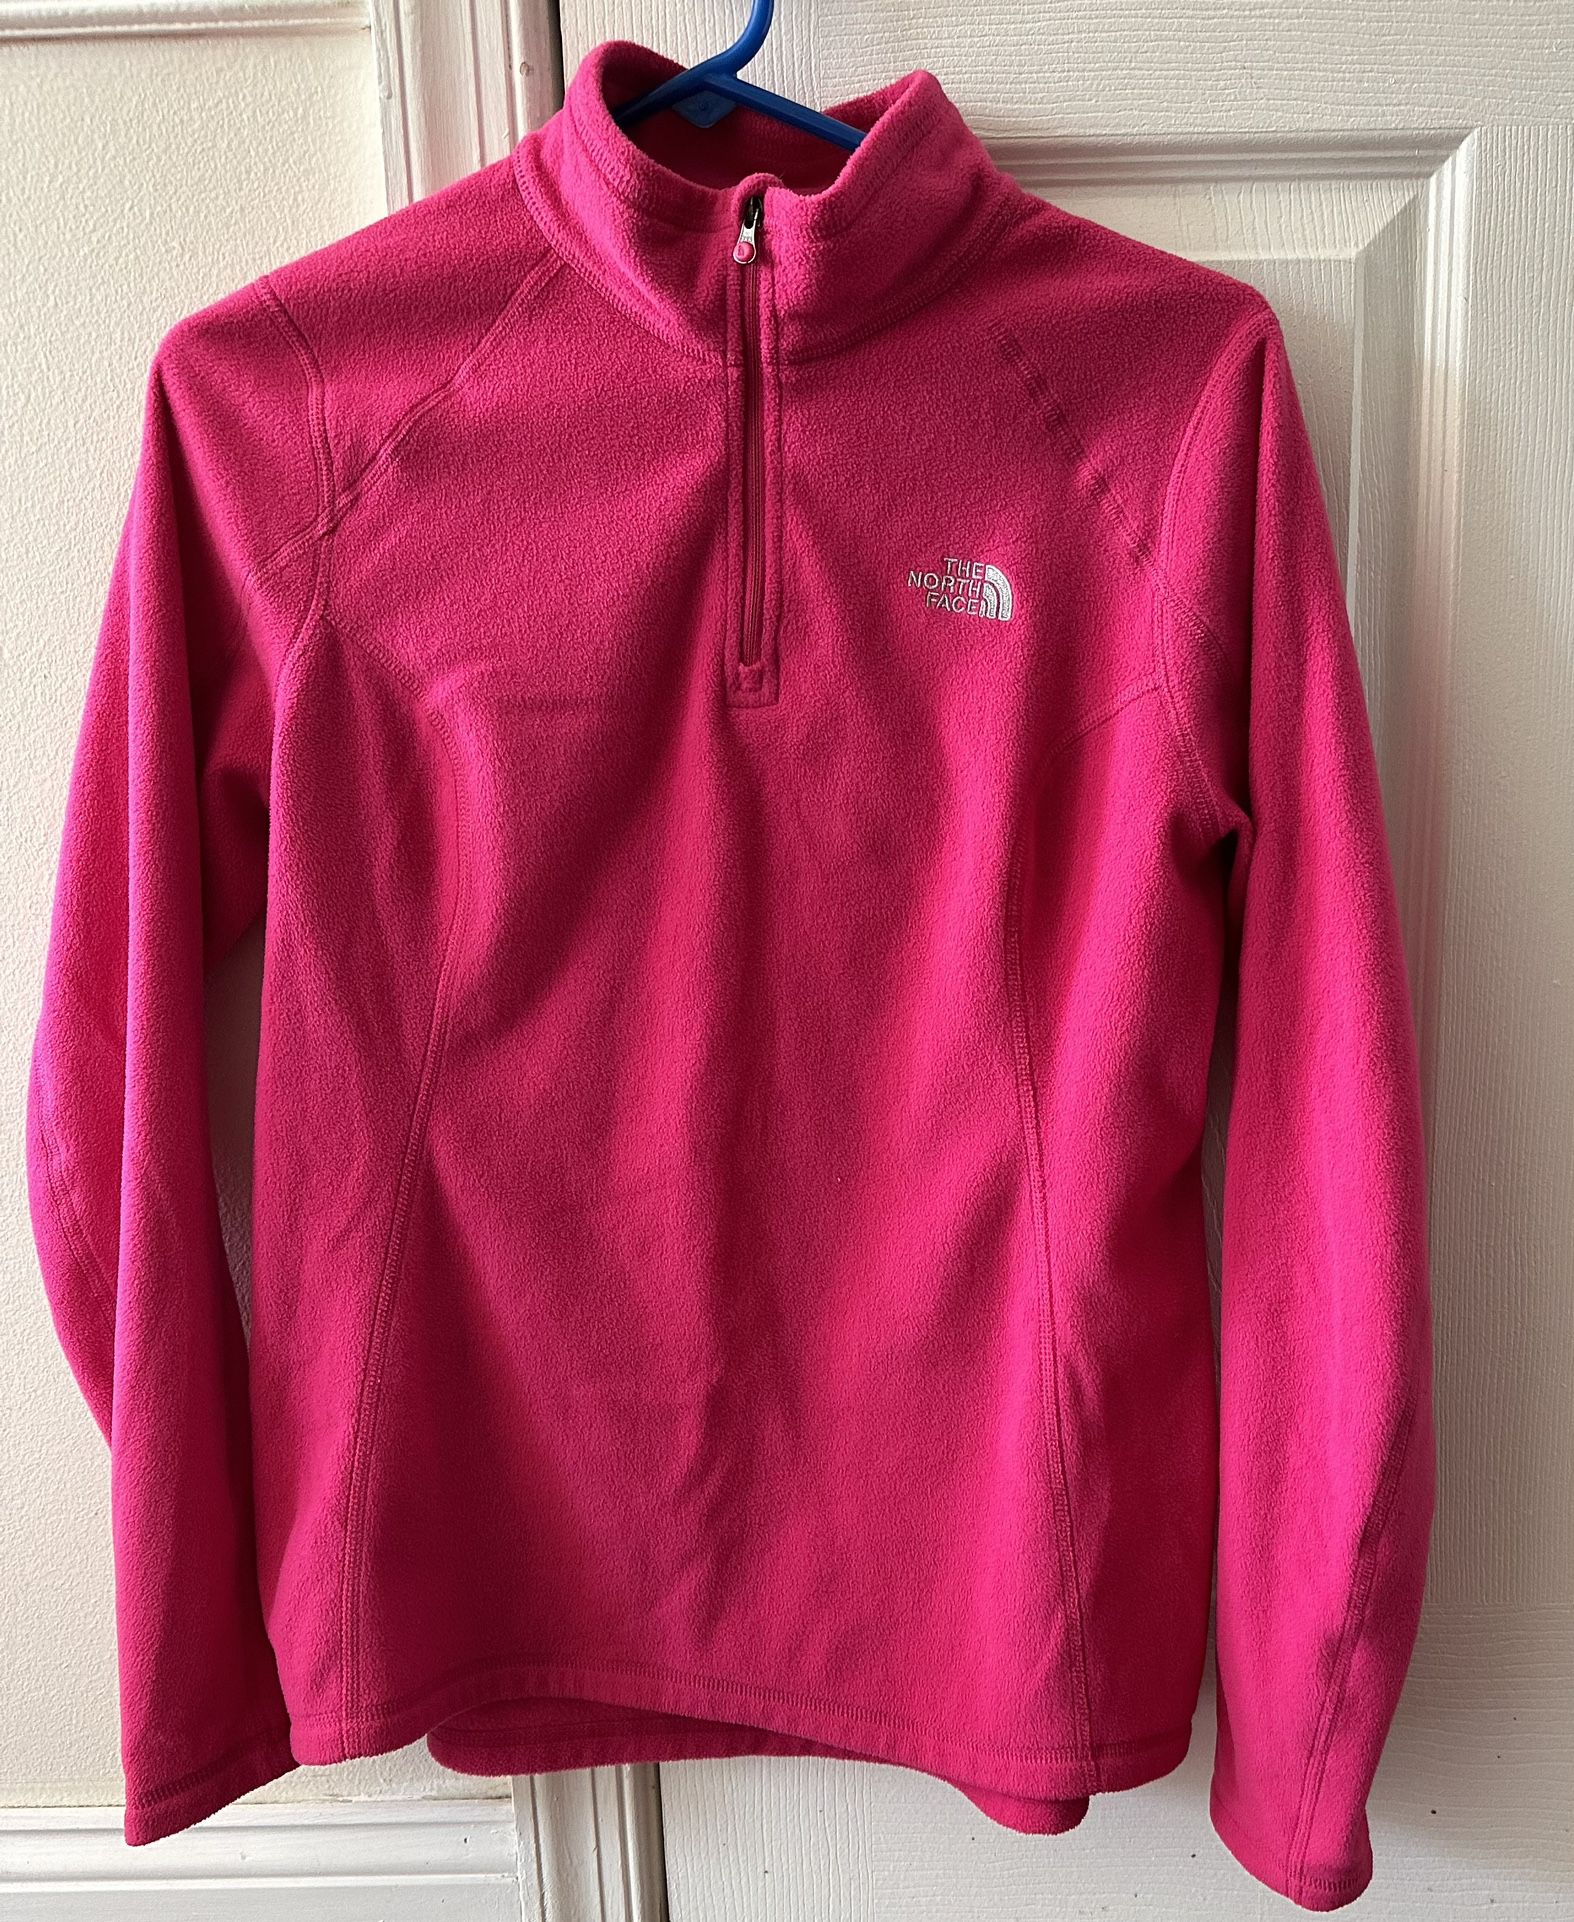 Women The North Face fleece Size Medium in good condition (cash & pick up only)